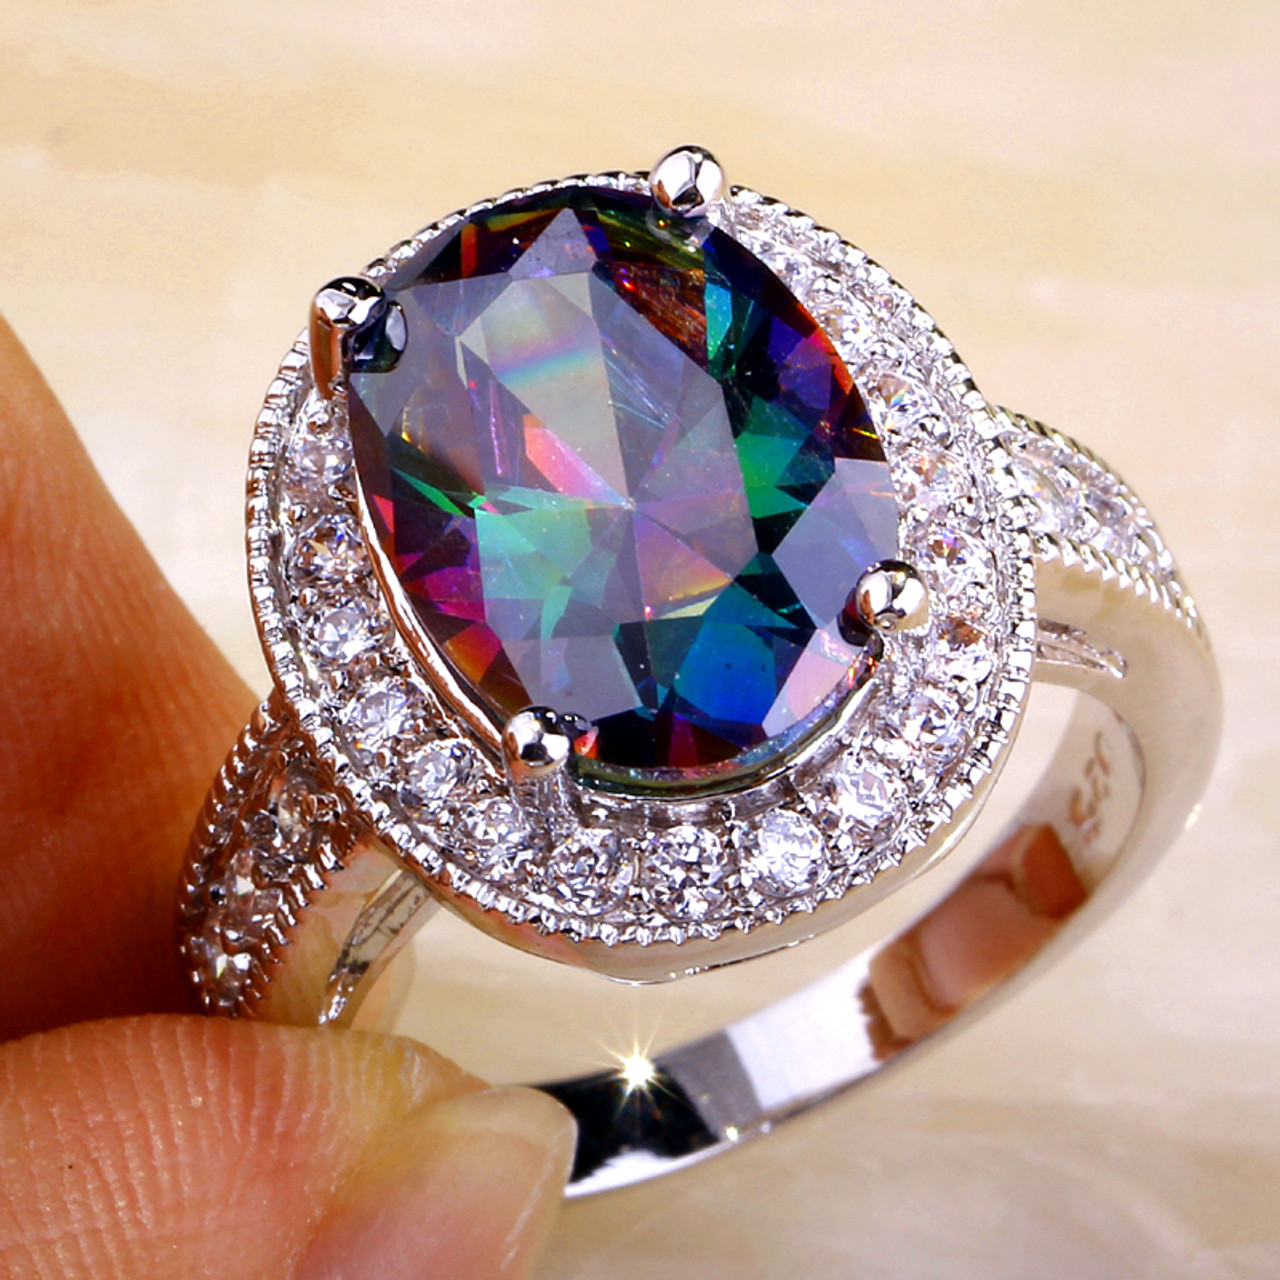 Classic Style Mysterious Halo Fashion Oval Cut Mystic Topaz Stone   Silver Ring